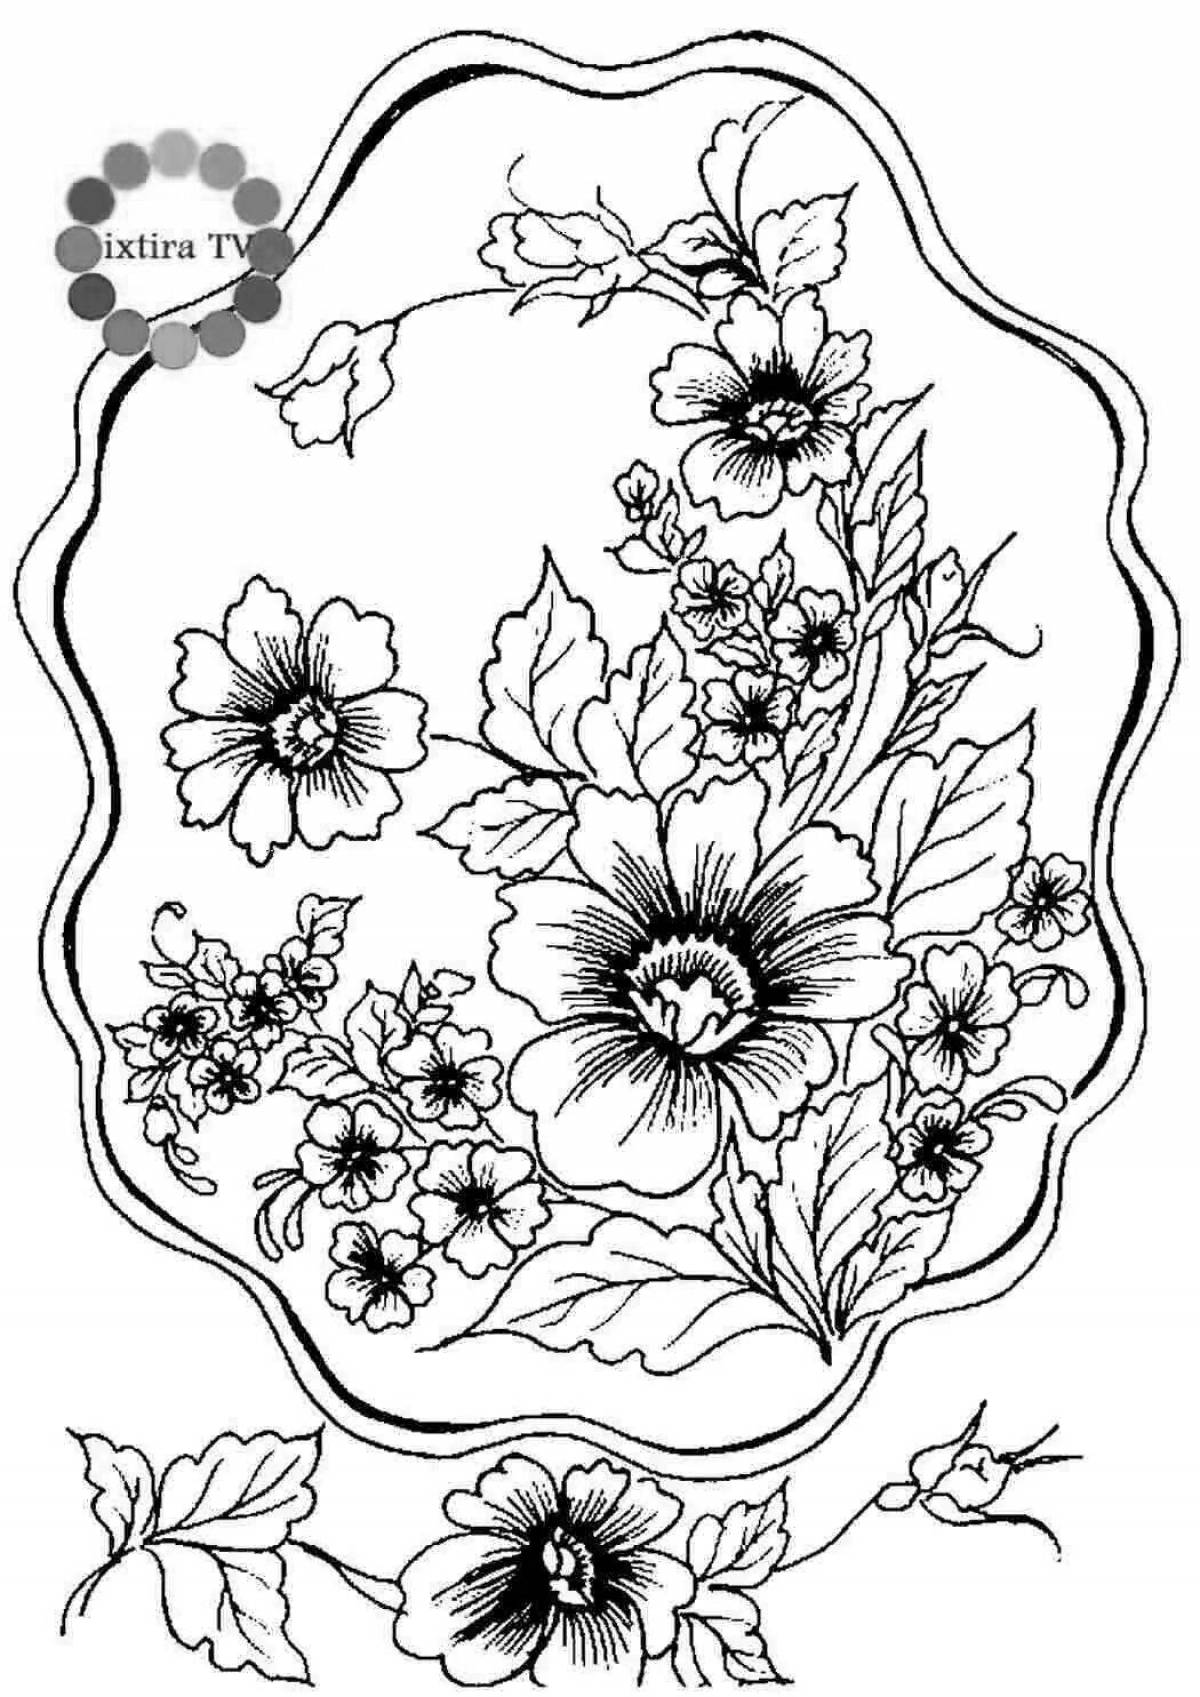 Coloring book blissful Zhhostovo flowers